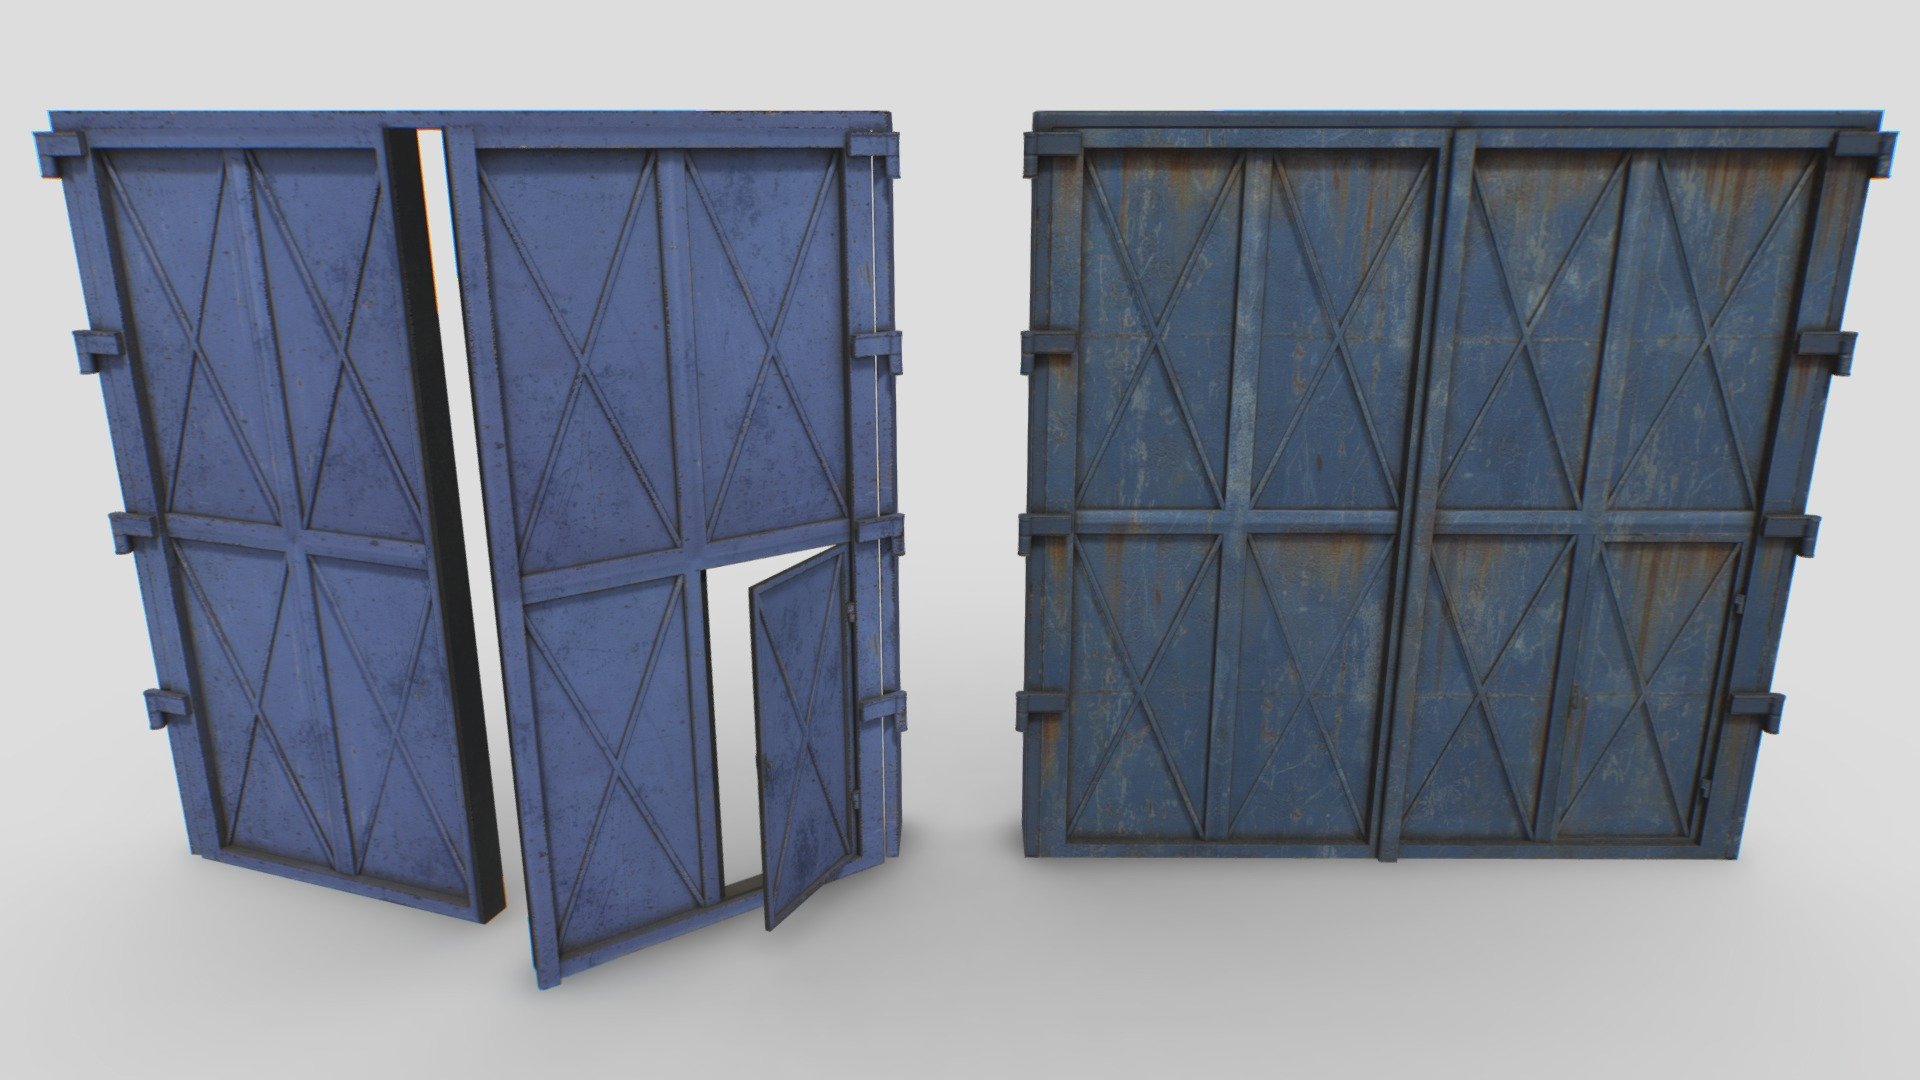 2 Realistic metal gates based in real one. Realistic scale.

Comes with 2 PBR 4096pix texture sets including Albedo, Normal, Roughness, Metalness, AO.

Suitable for factories, hangars, warehouses, etc..

Gates can be opened as showed in the pics 3d model